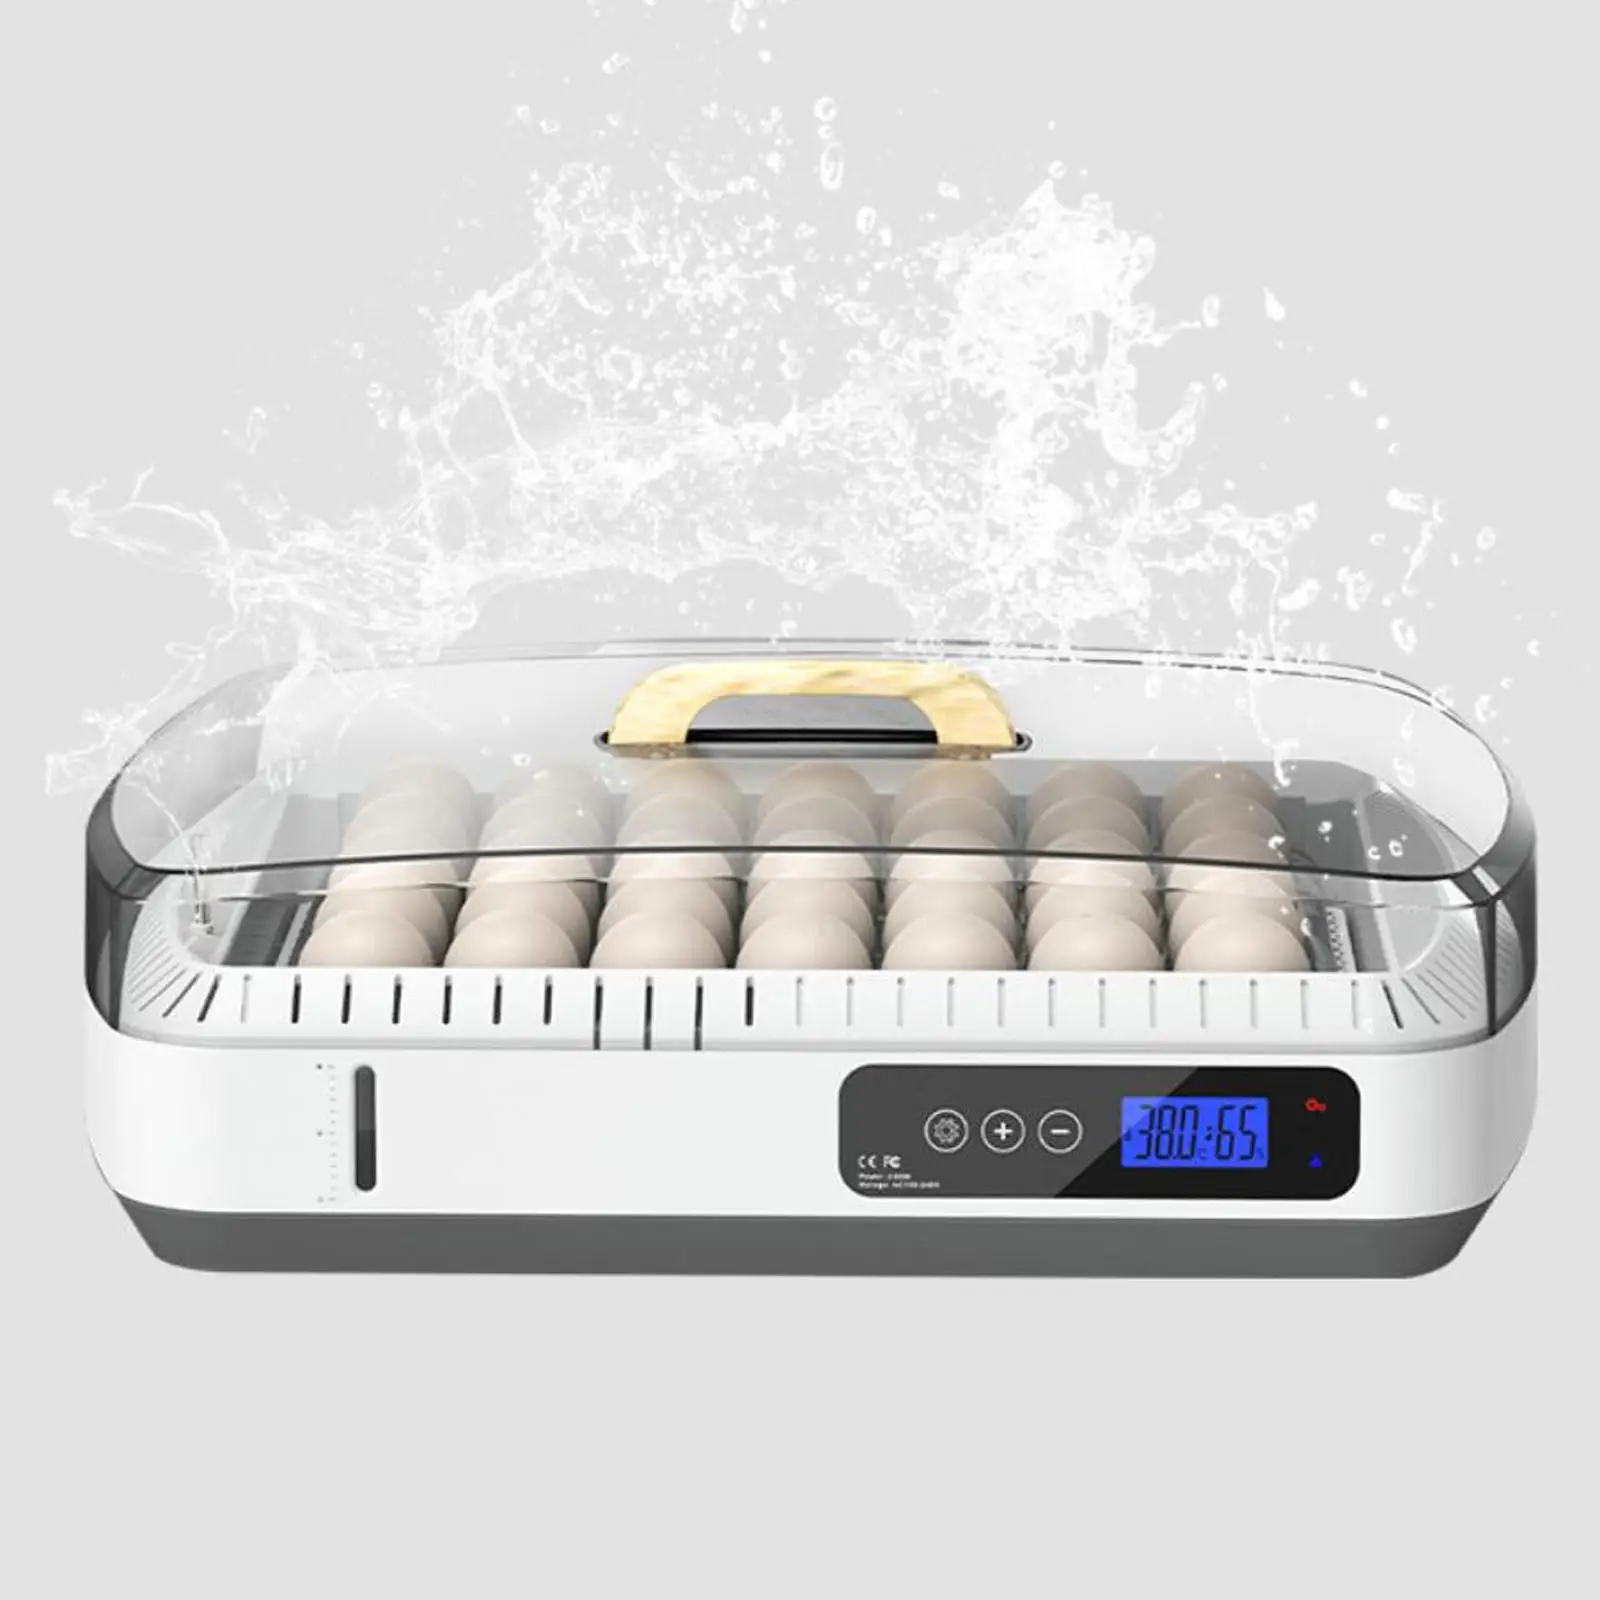 Digital Egg Incubator Automatic Egg Turner 35Eggs Automatic Poultry Hatcher Machine for Bird Eggs Duck Hatching Most Eggs